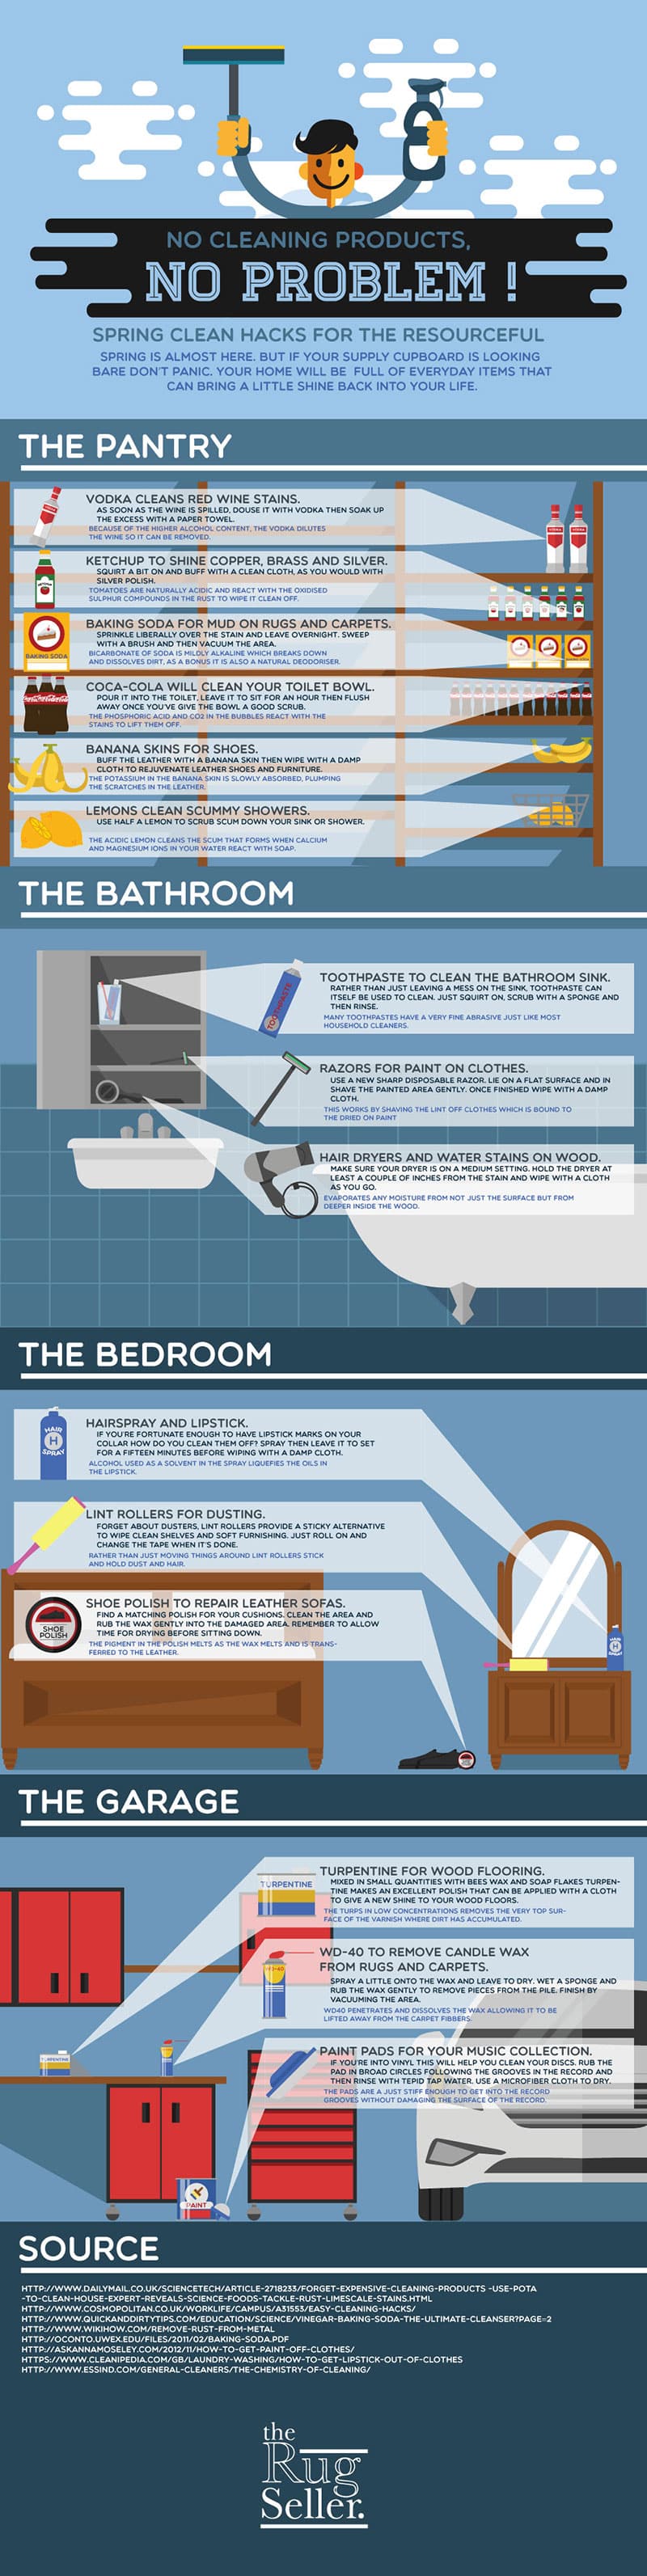  spring-cleaning-hacks-infographic 